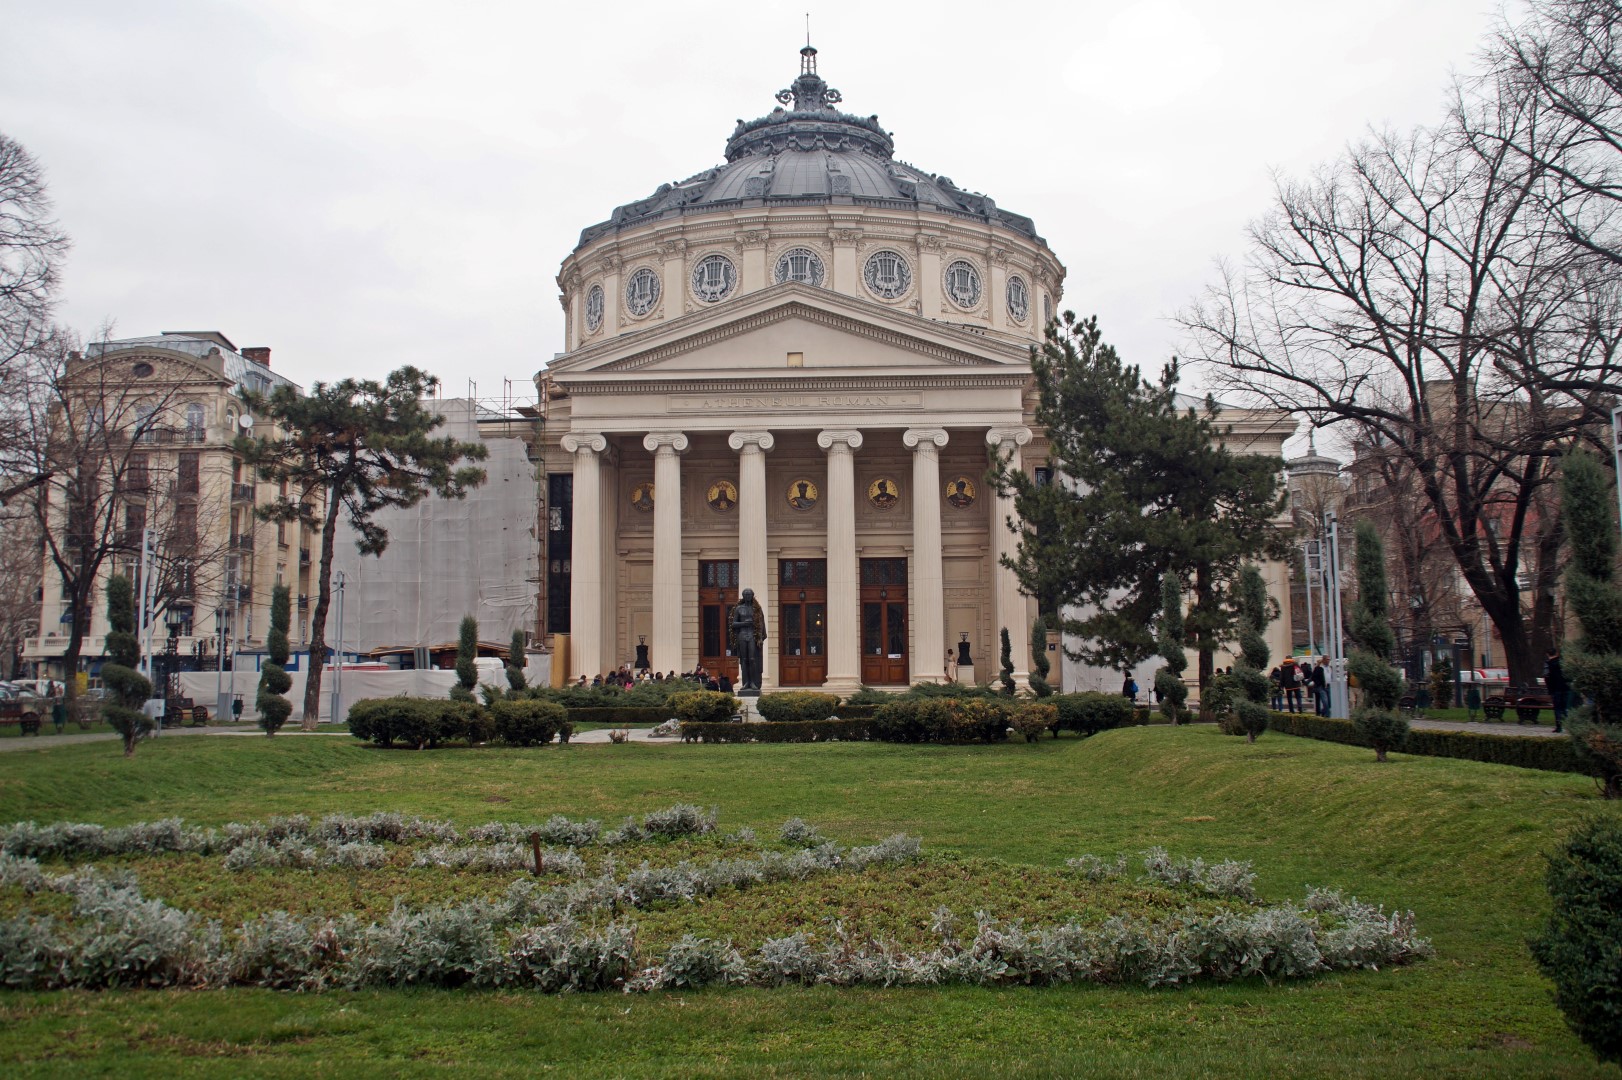 The Romanian Athenaeum, a concert hall from 1888